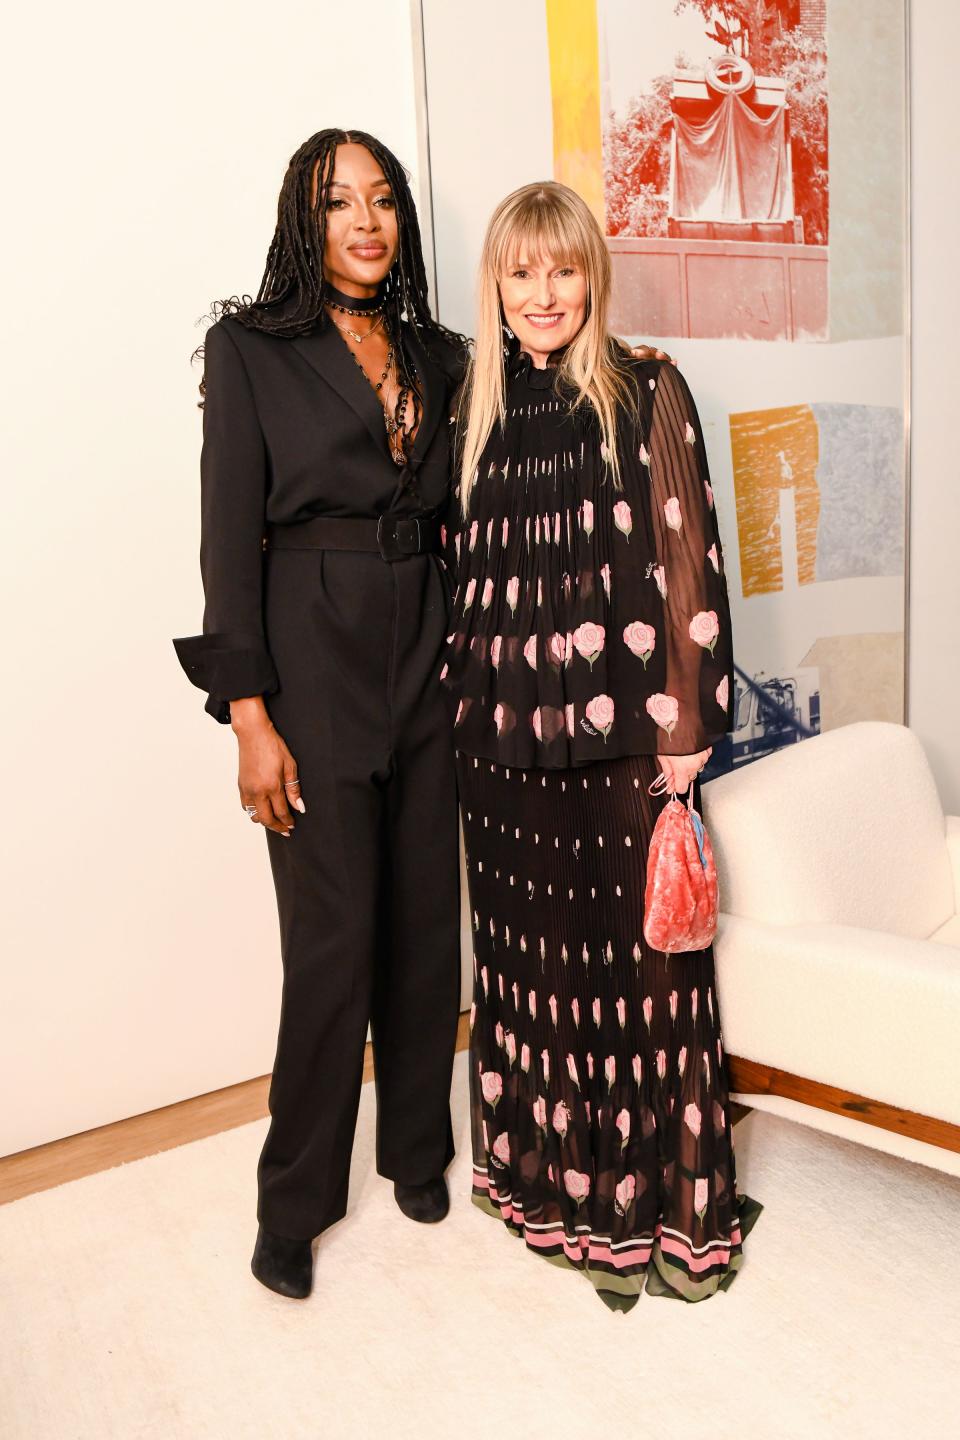 With Naomi Campbell in NYC.